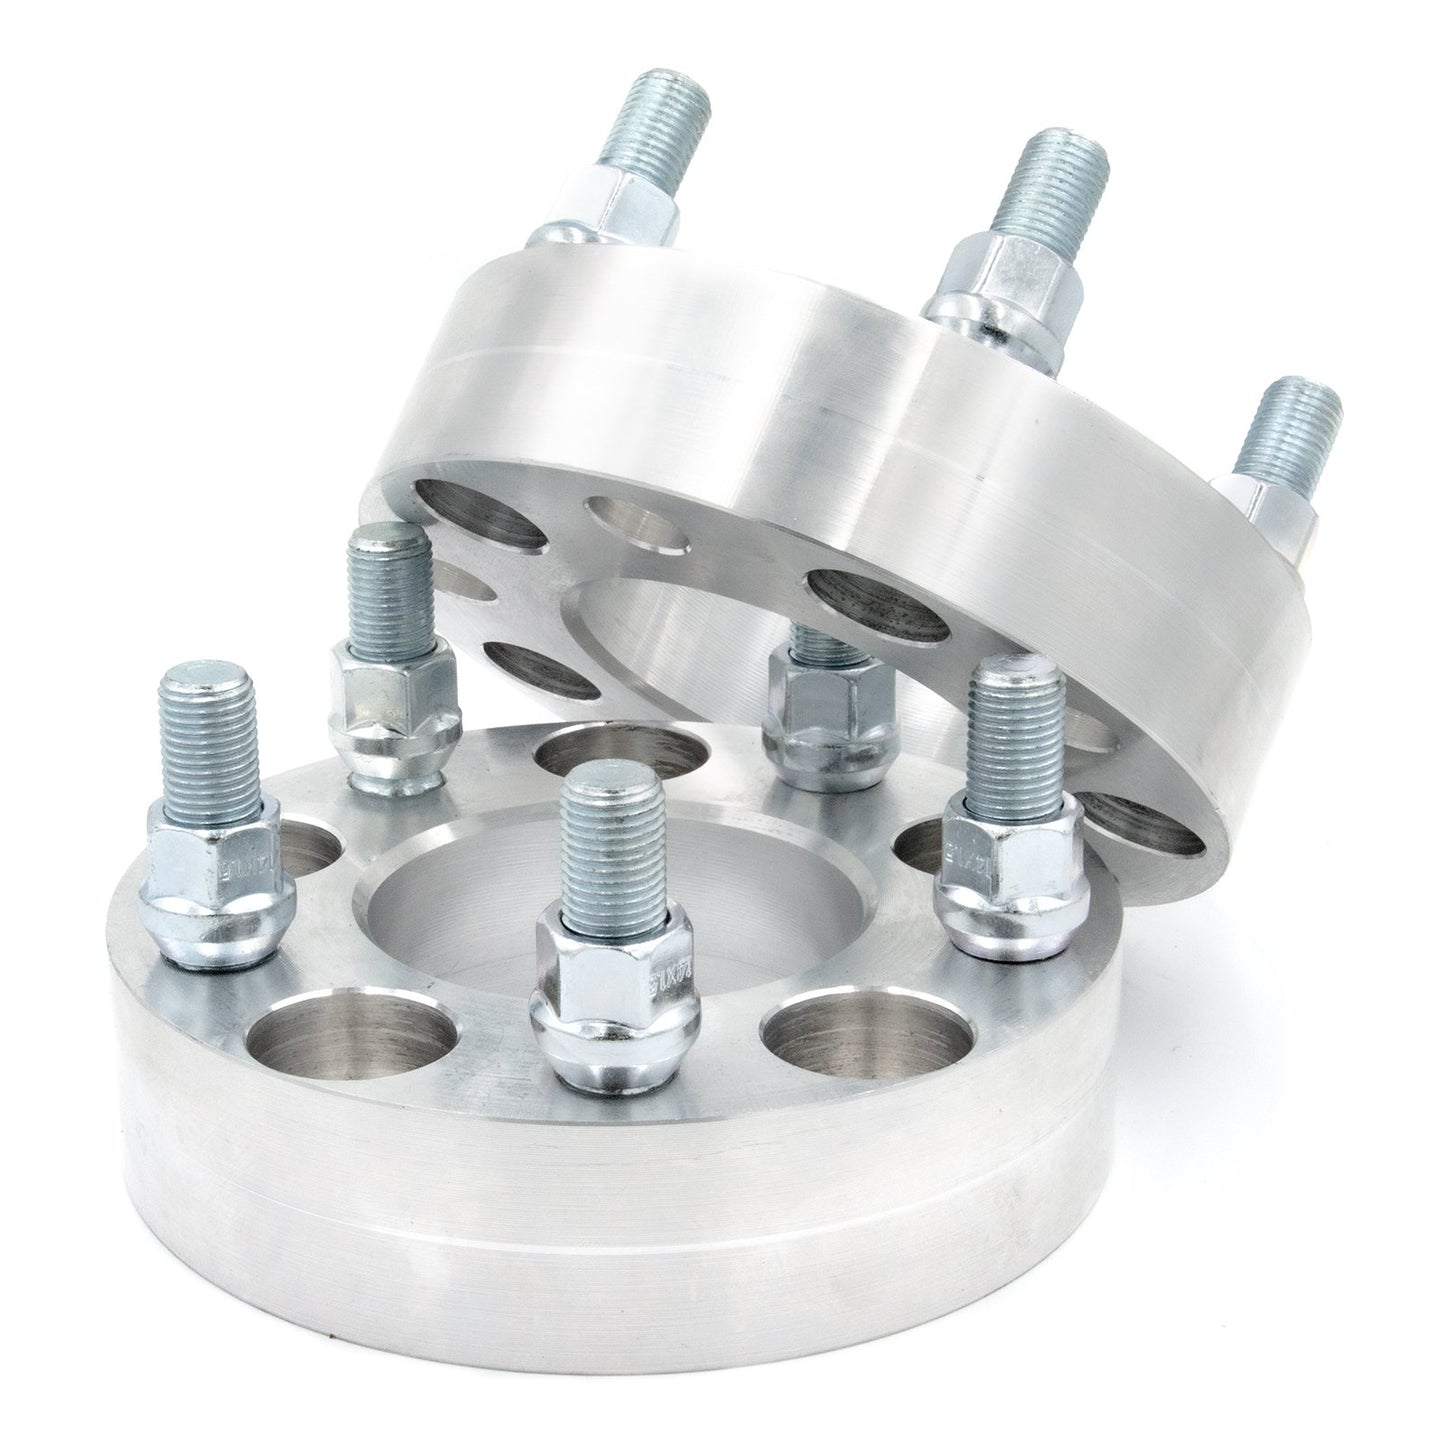 5x98 to 5x100 Wheel Spacer/Adapter - Thickness: 3/4"- 4"